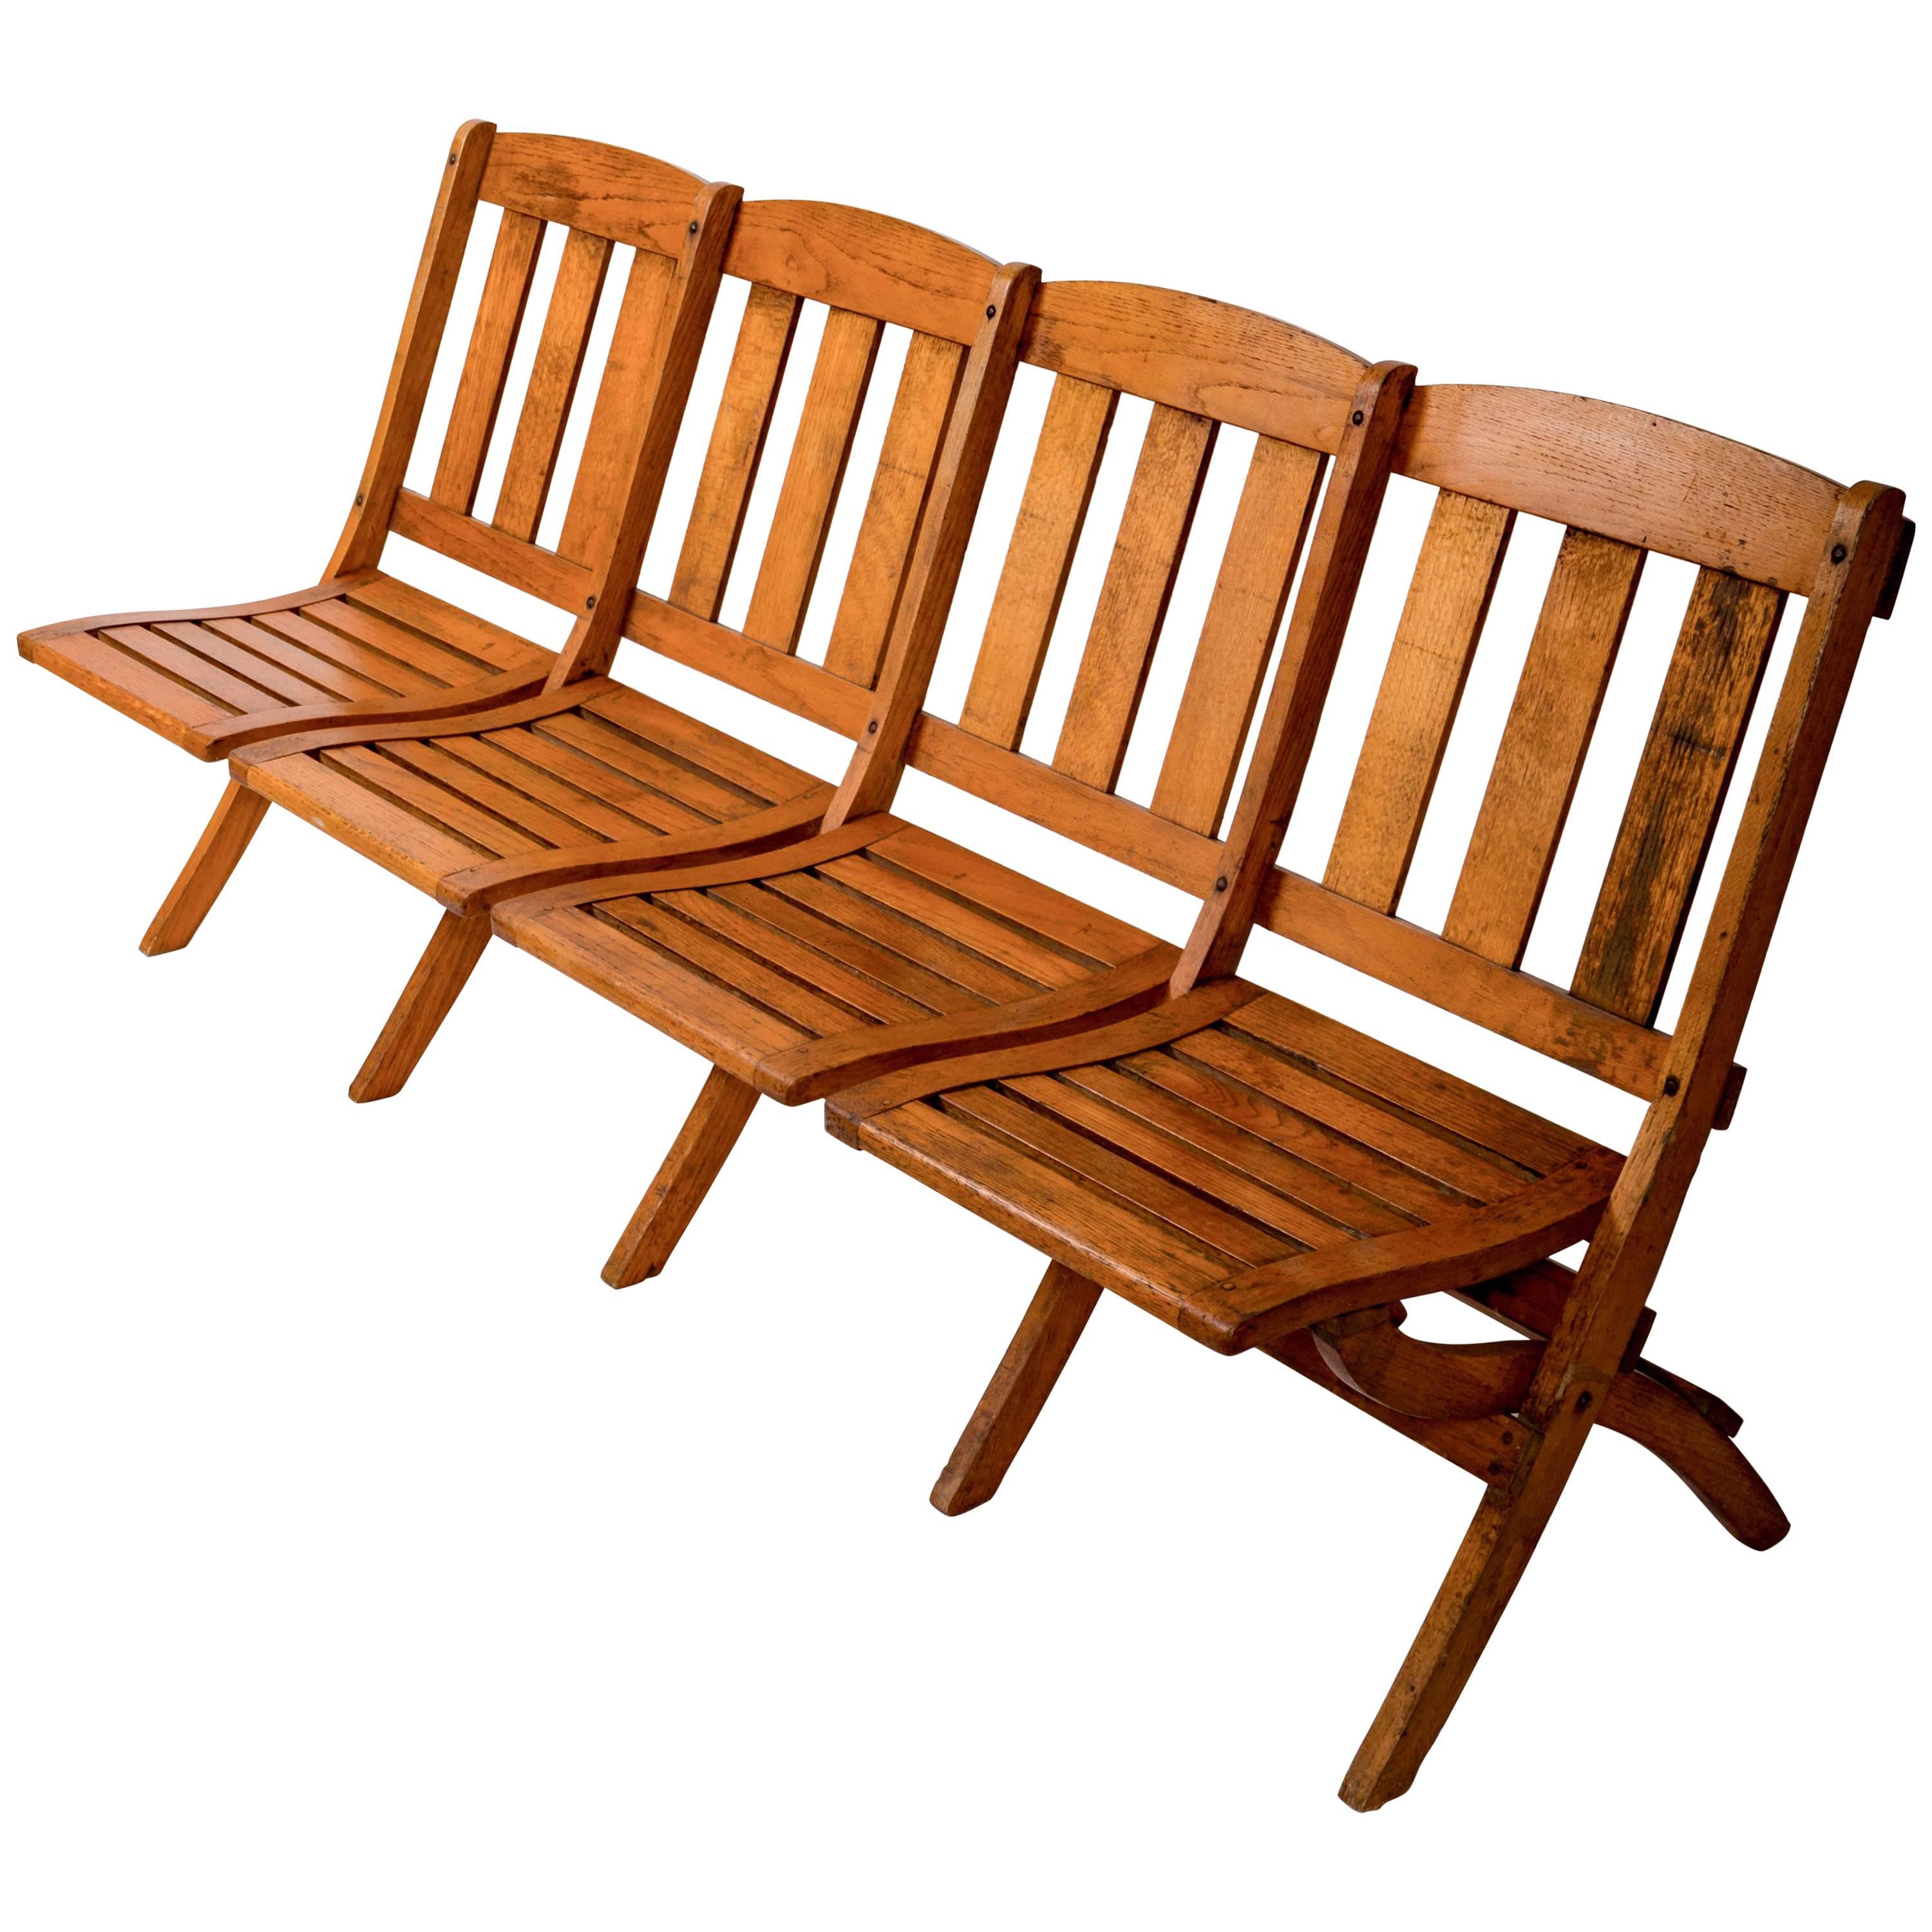 1920s Four-Seat Folding Railroad Bench, Capetown South Africa, circa 1920s For Sale